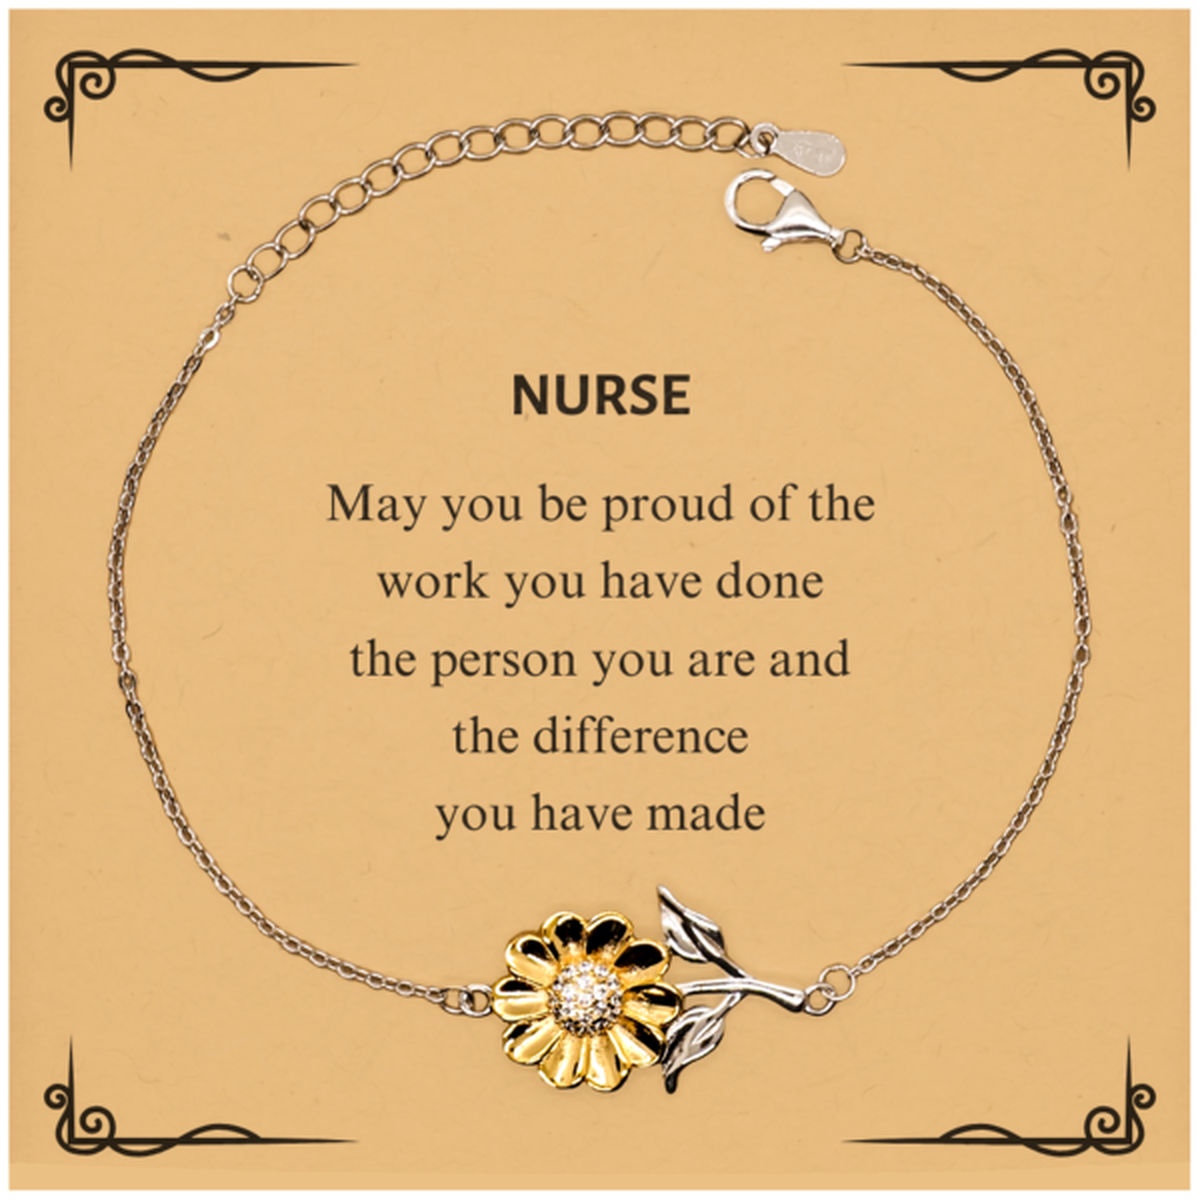 Nurse May you be proud of the work you have done, Retirement Nurse Sunflower Bracelet for Colleague Appreciation Gifts Amazing for Nurse